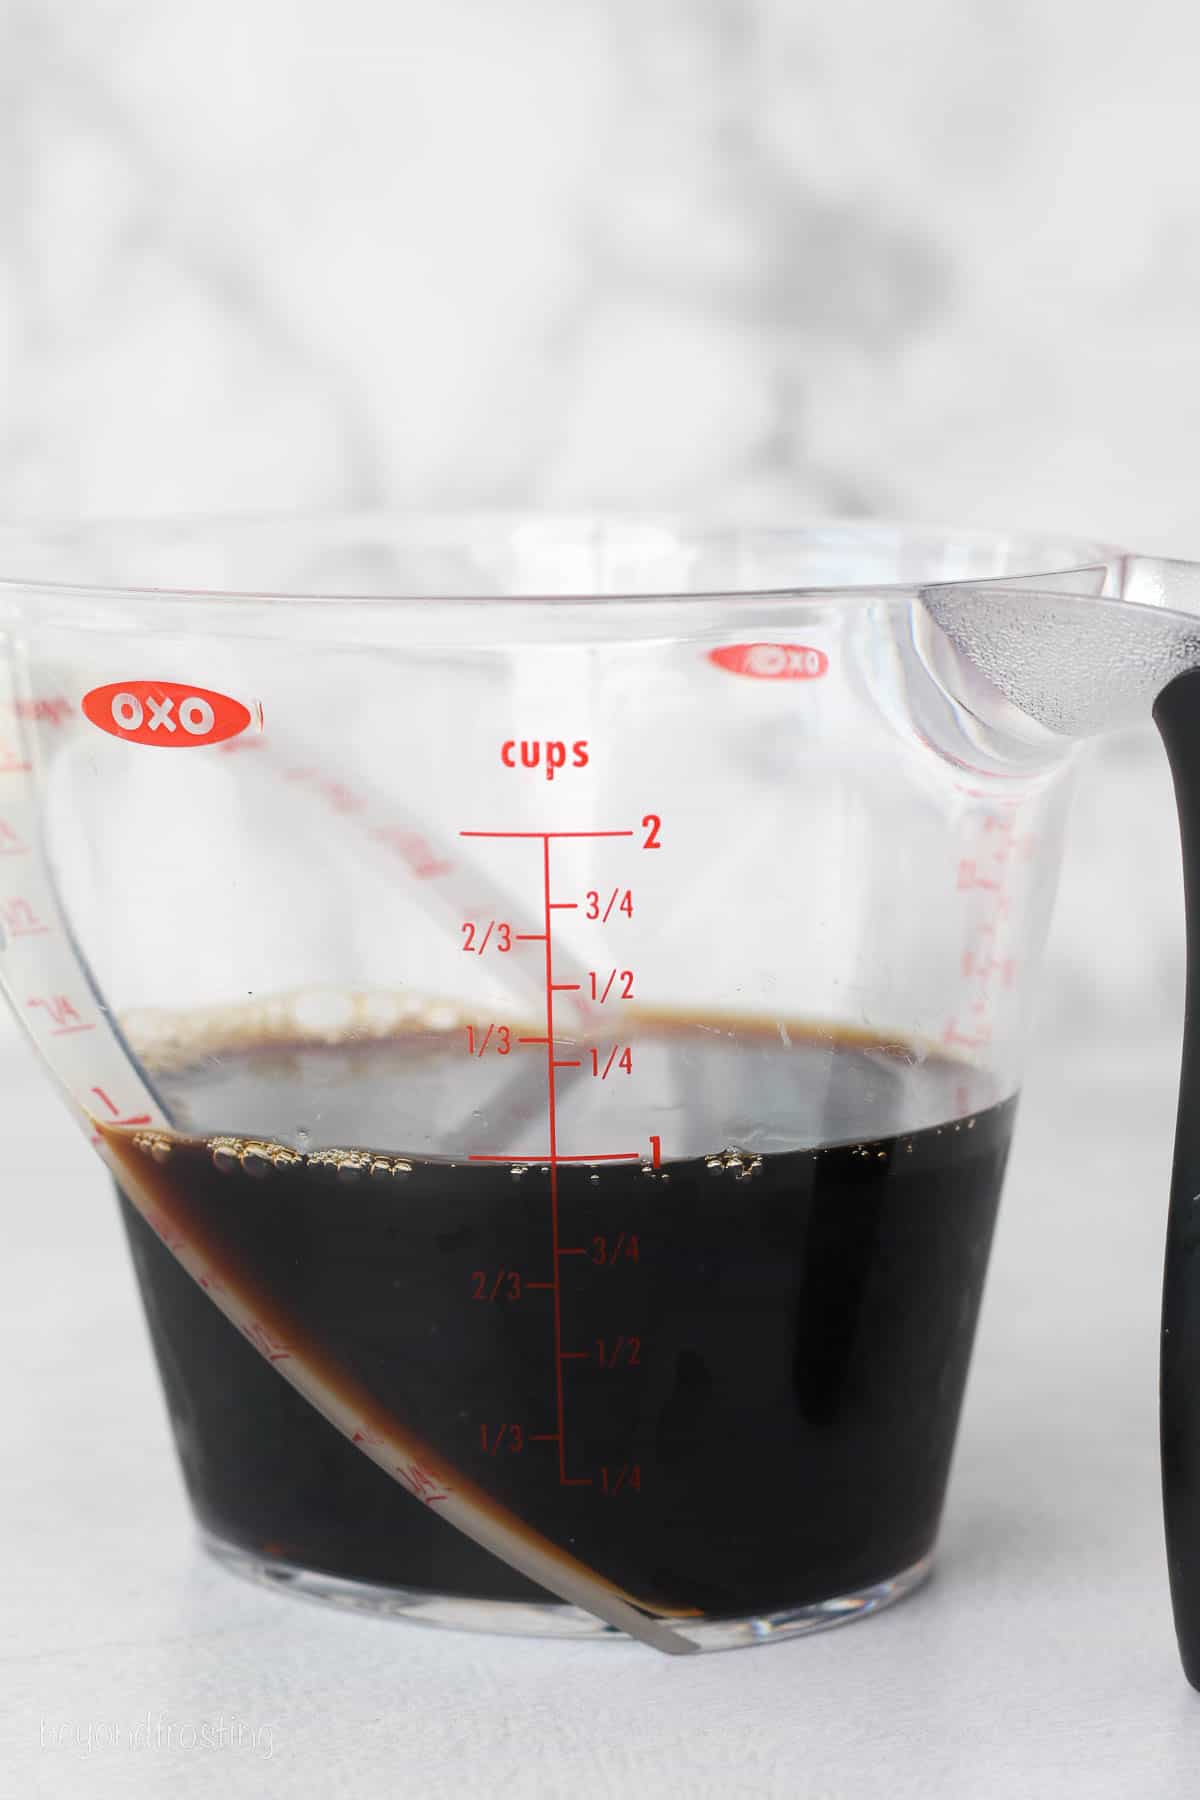 A 2-cup OXO measuring cup filled with 1 cup of coffee